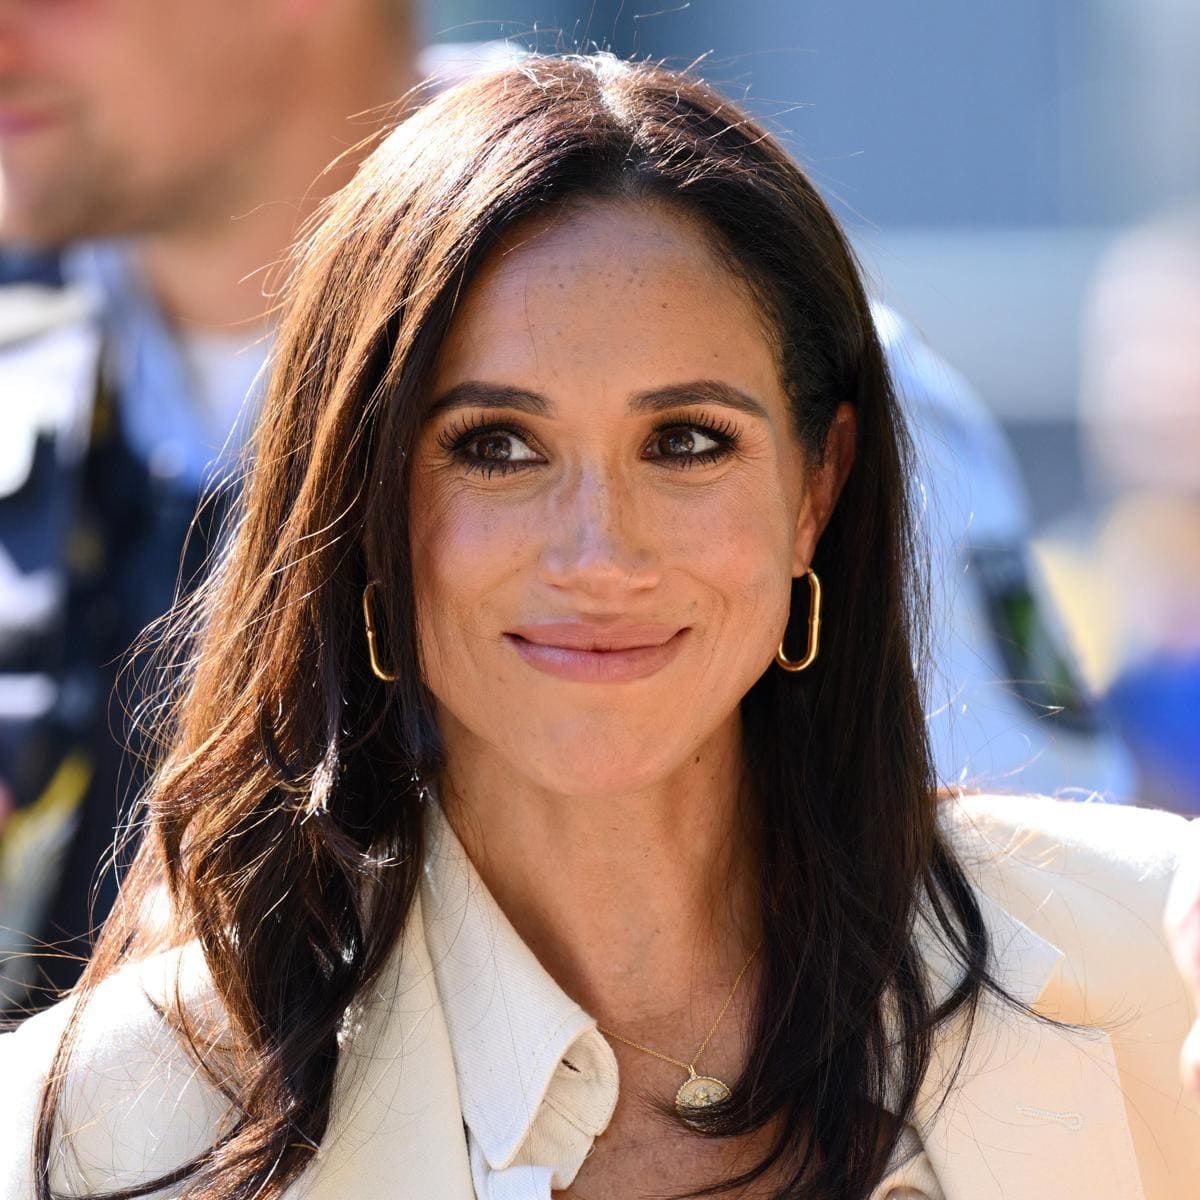 Meghan Markle is heading to Texas this week!